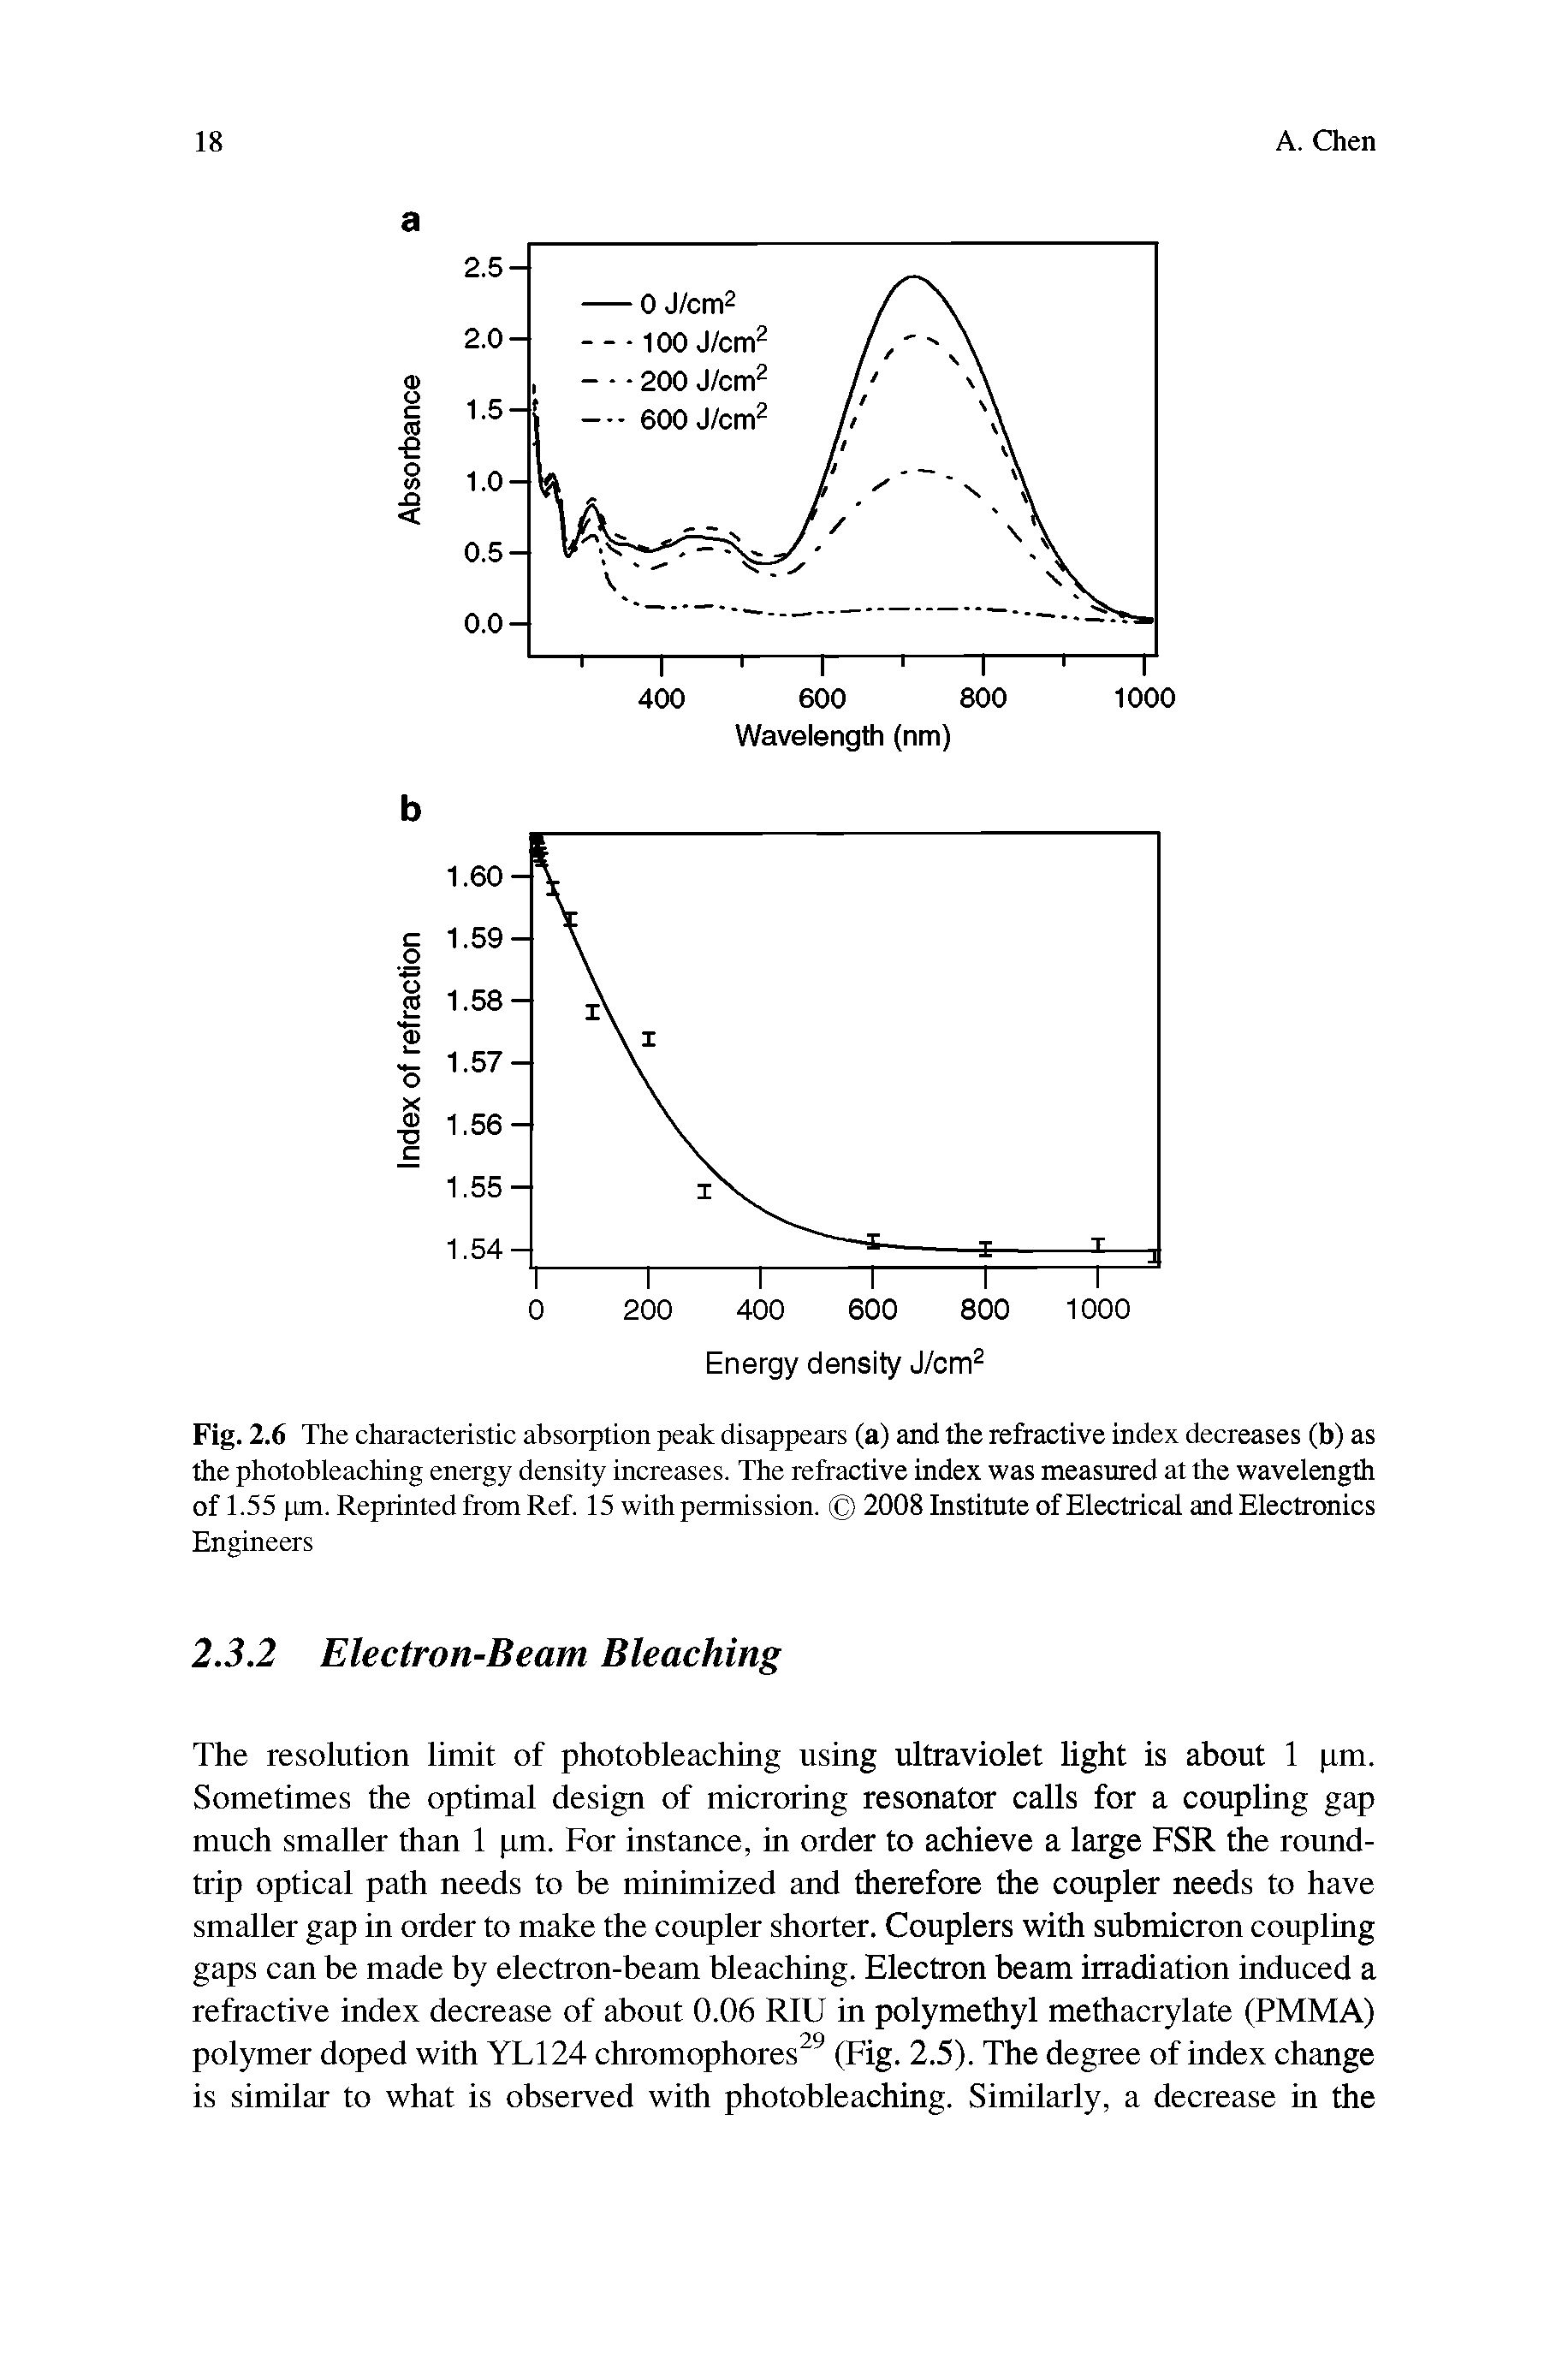 Fig. 2.6 The characteristic absorption peak disappears (a) and the refractive index decreases (b) as the photobleaching energy density increases. The refractive index was measured at the wavelength of 1.55 pm. Reprinted from Ref. 15 with permission. 2008 Institute of Electrical and Electronics Engineers...